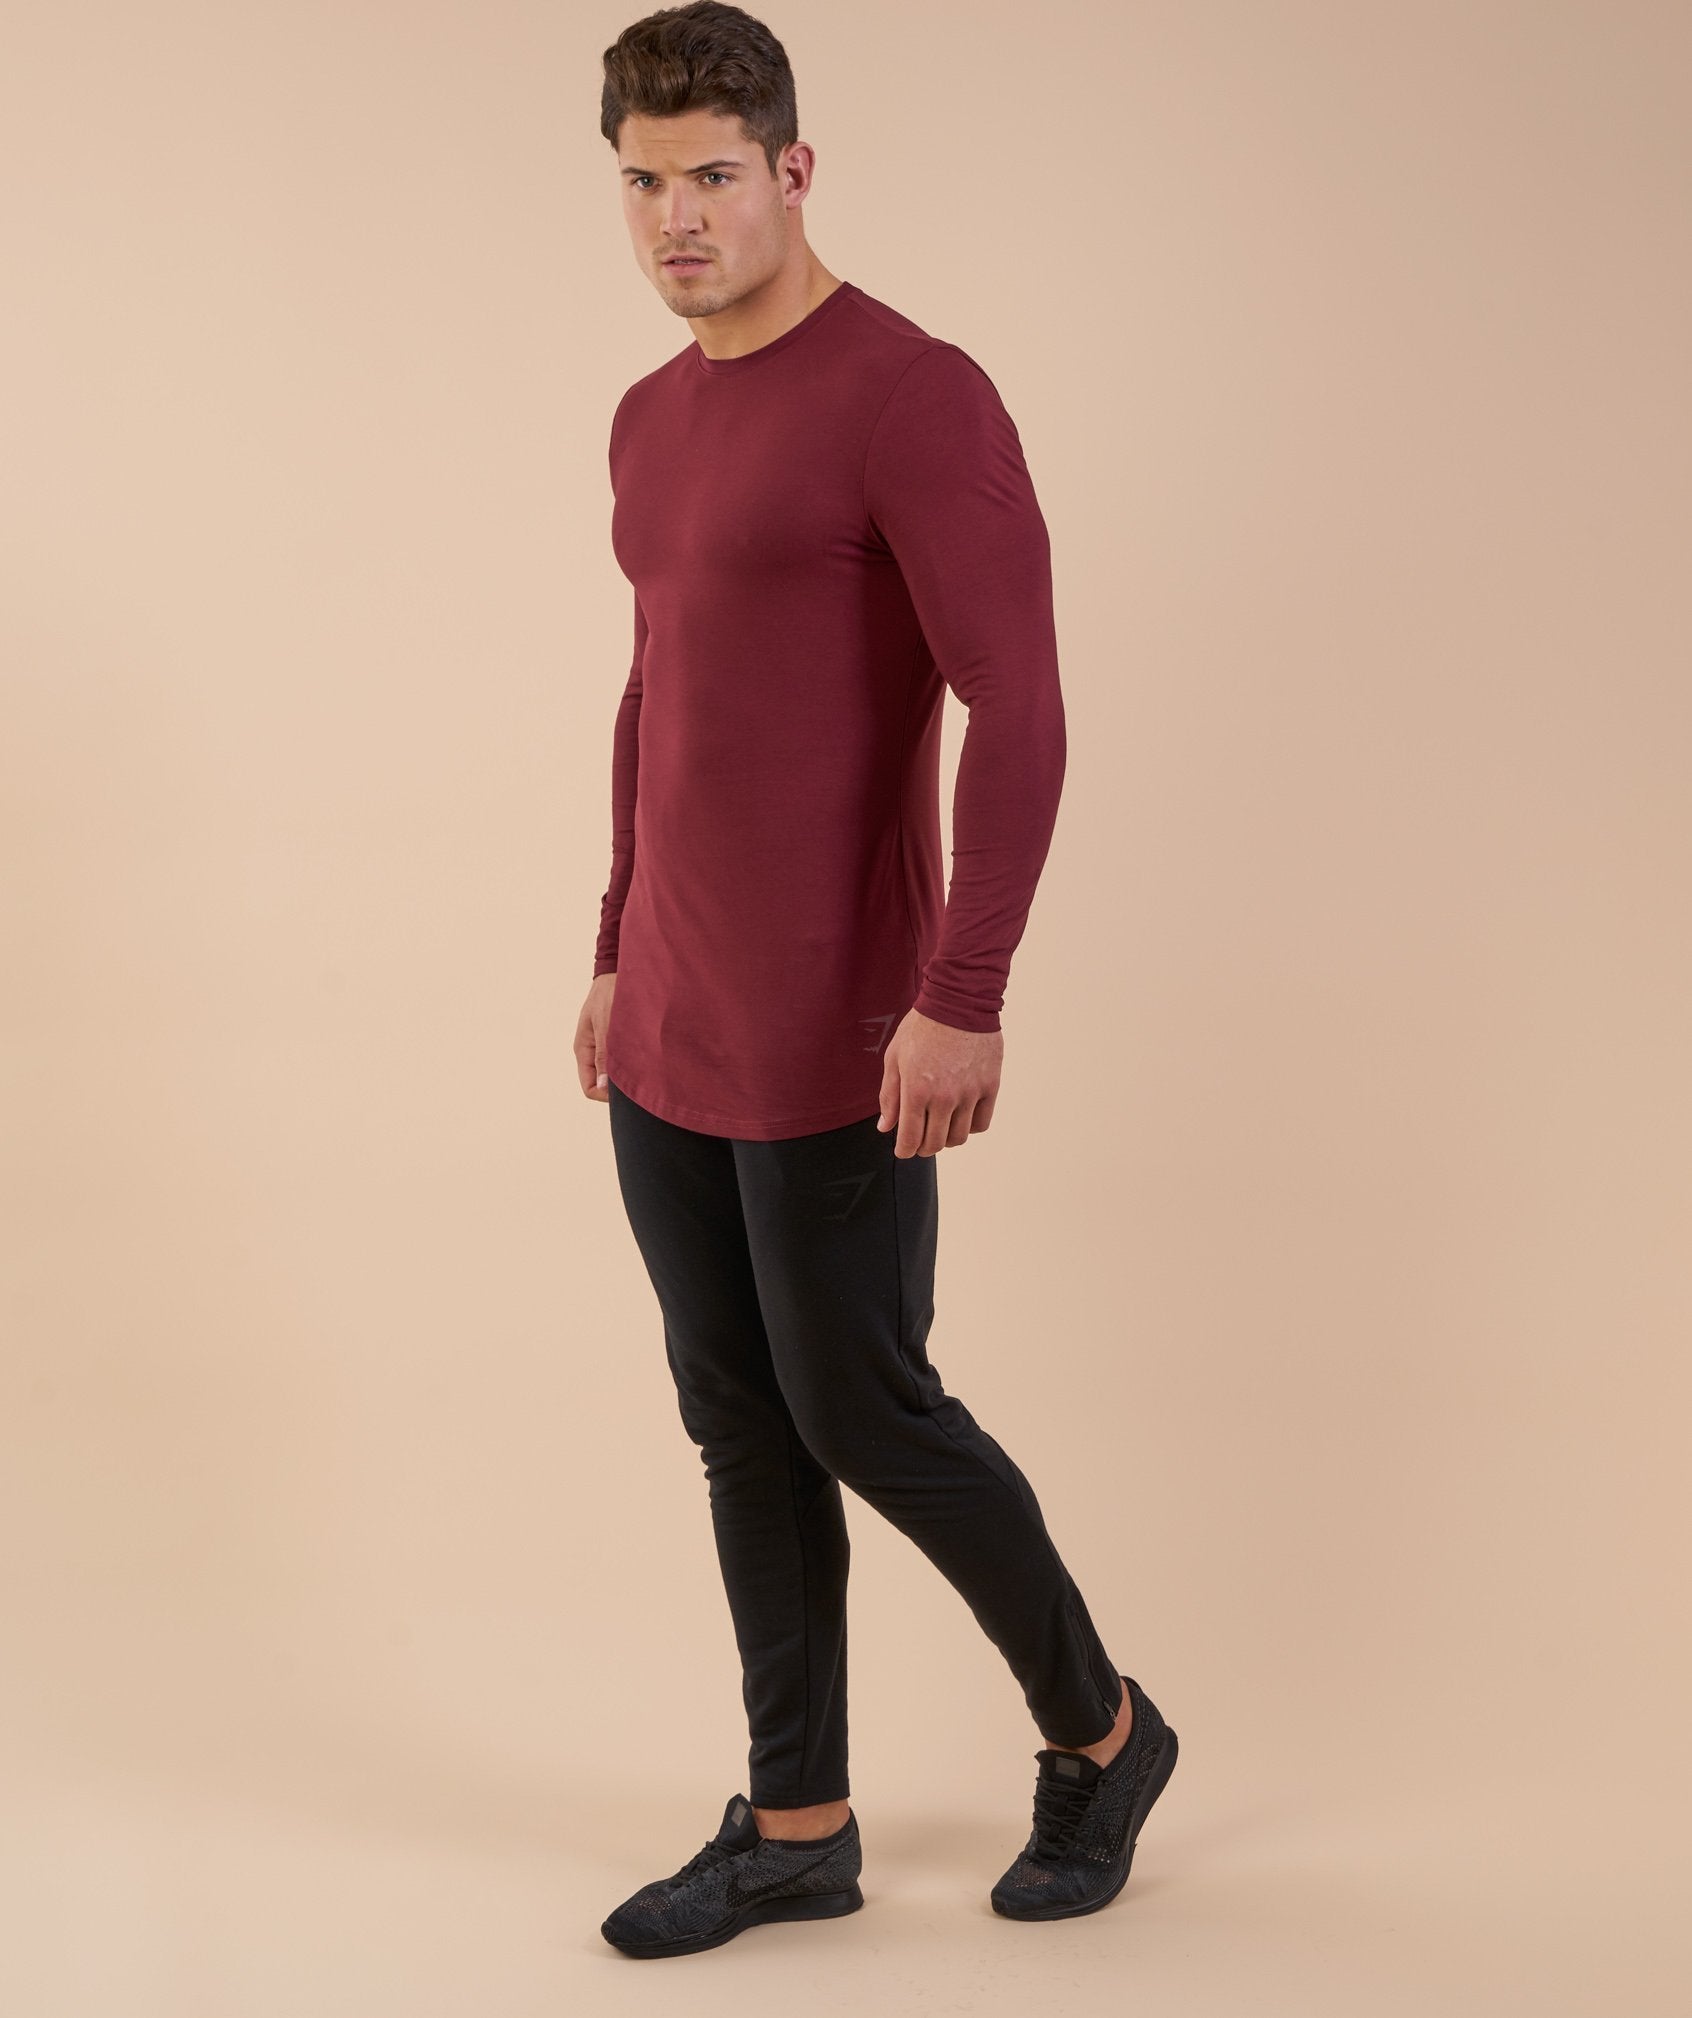 Solace Longline Long Sleeve T-shirt in Port - view 5